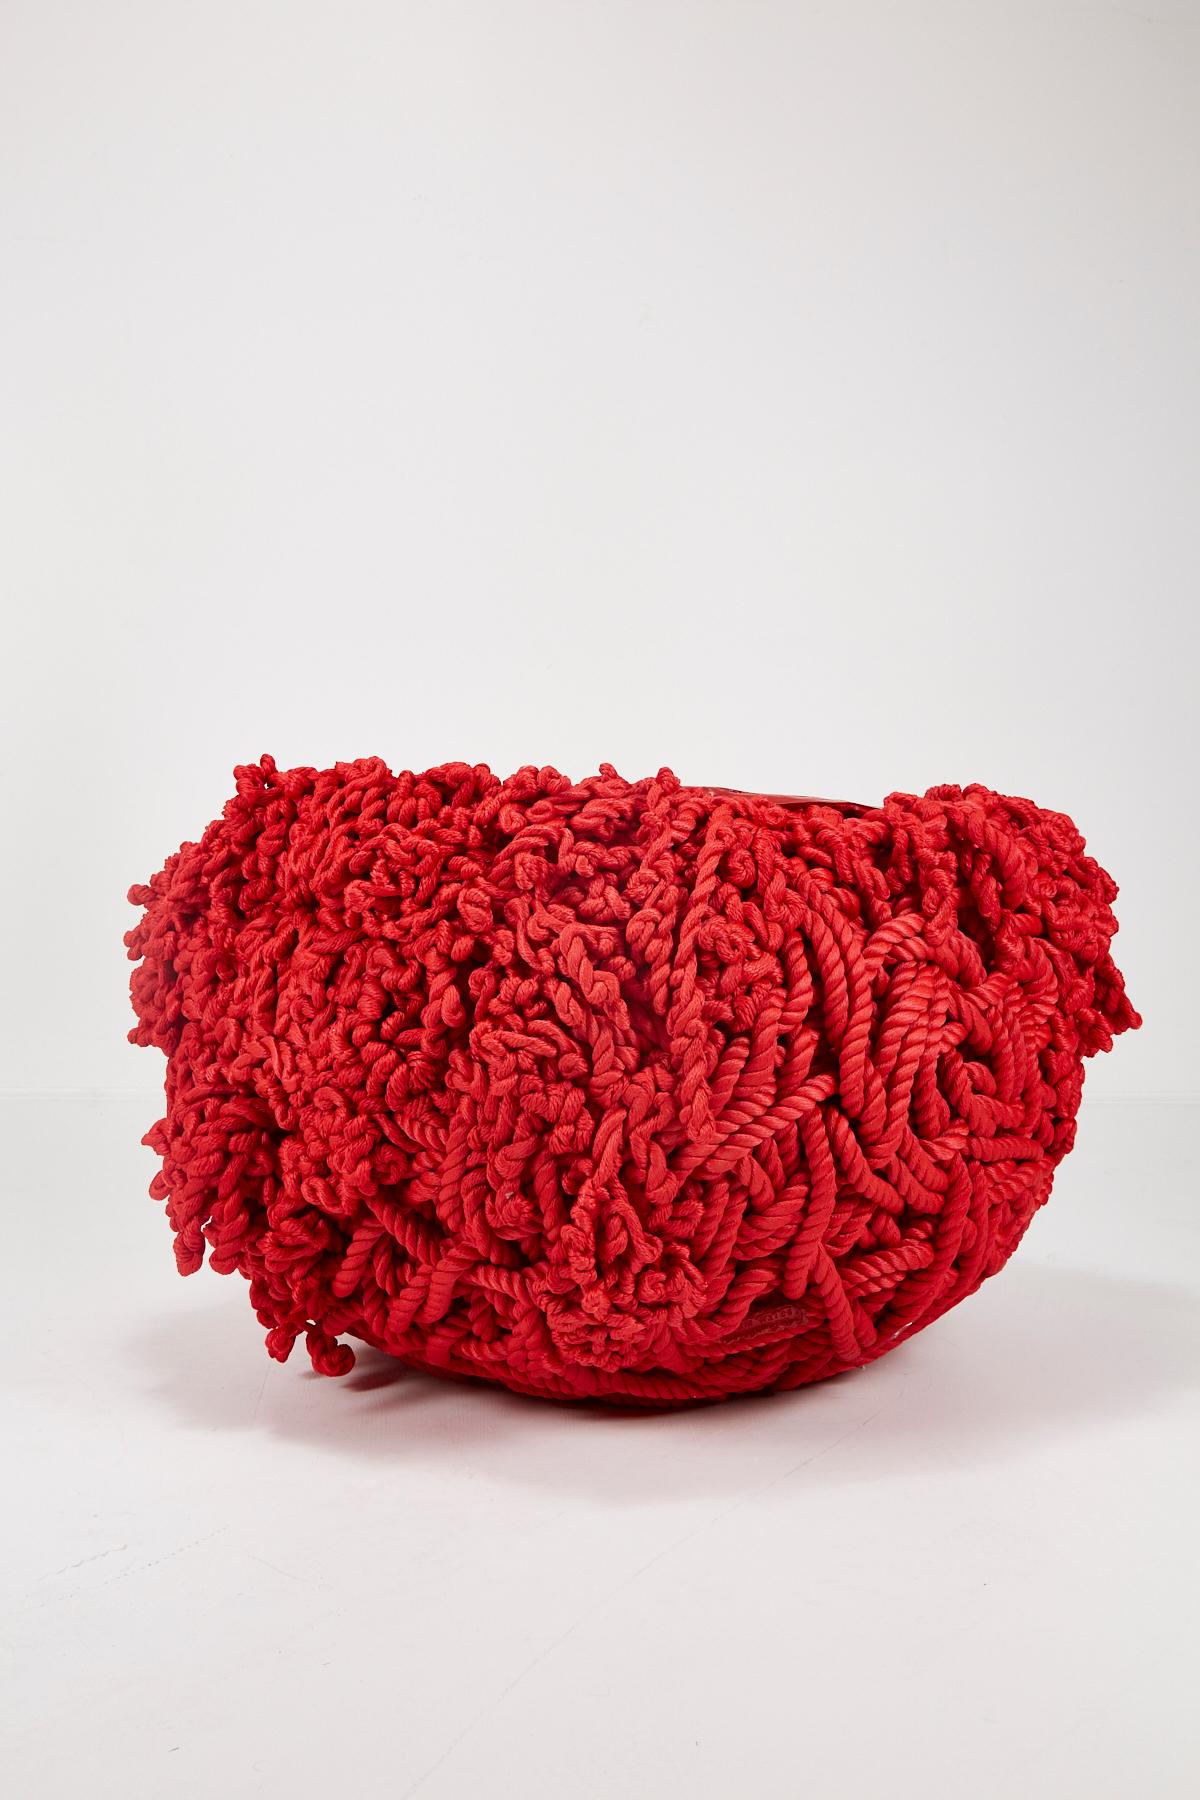 Meltdown Chair Pp Rope Red by Tom Price, 2017 2